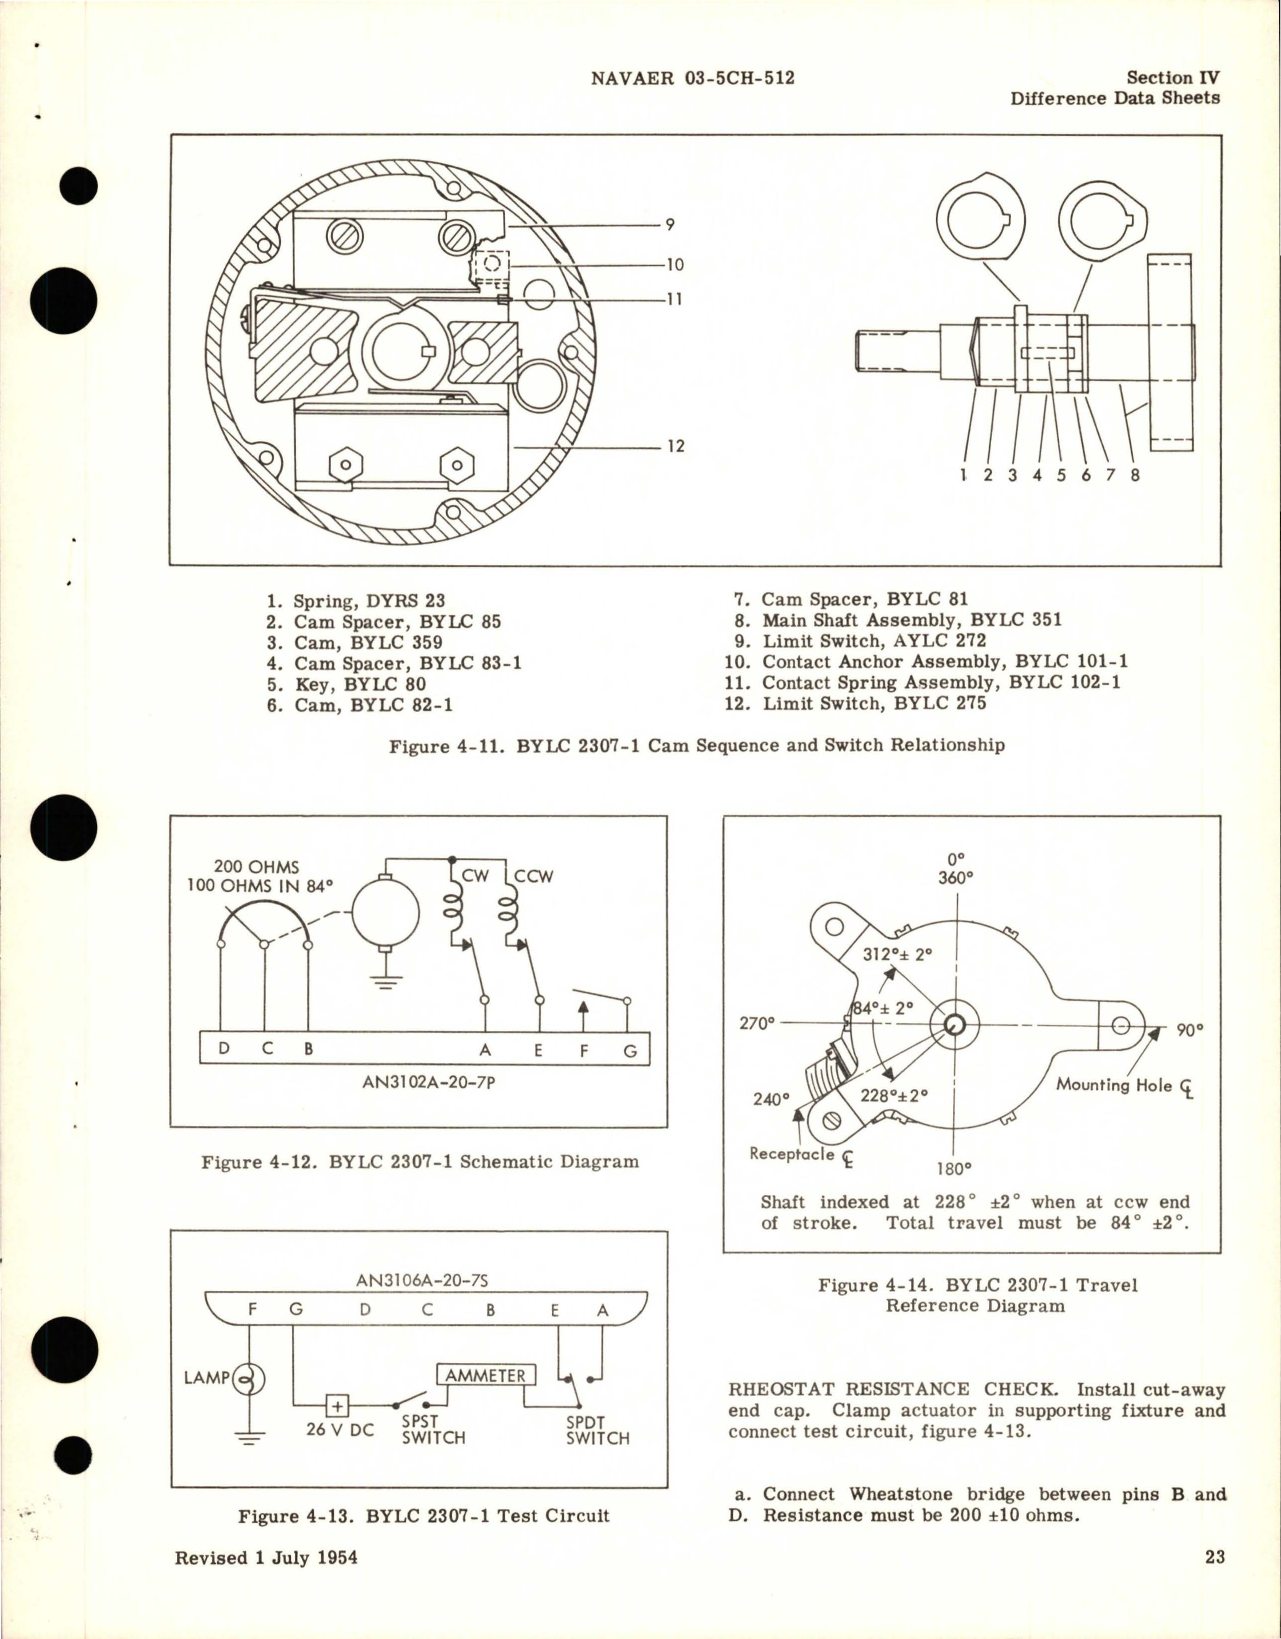 Sample page 5 from AirCorps Library document: Overhaul Instructions for Actuators  